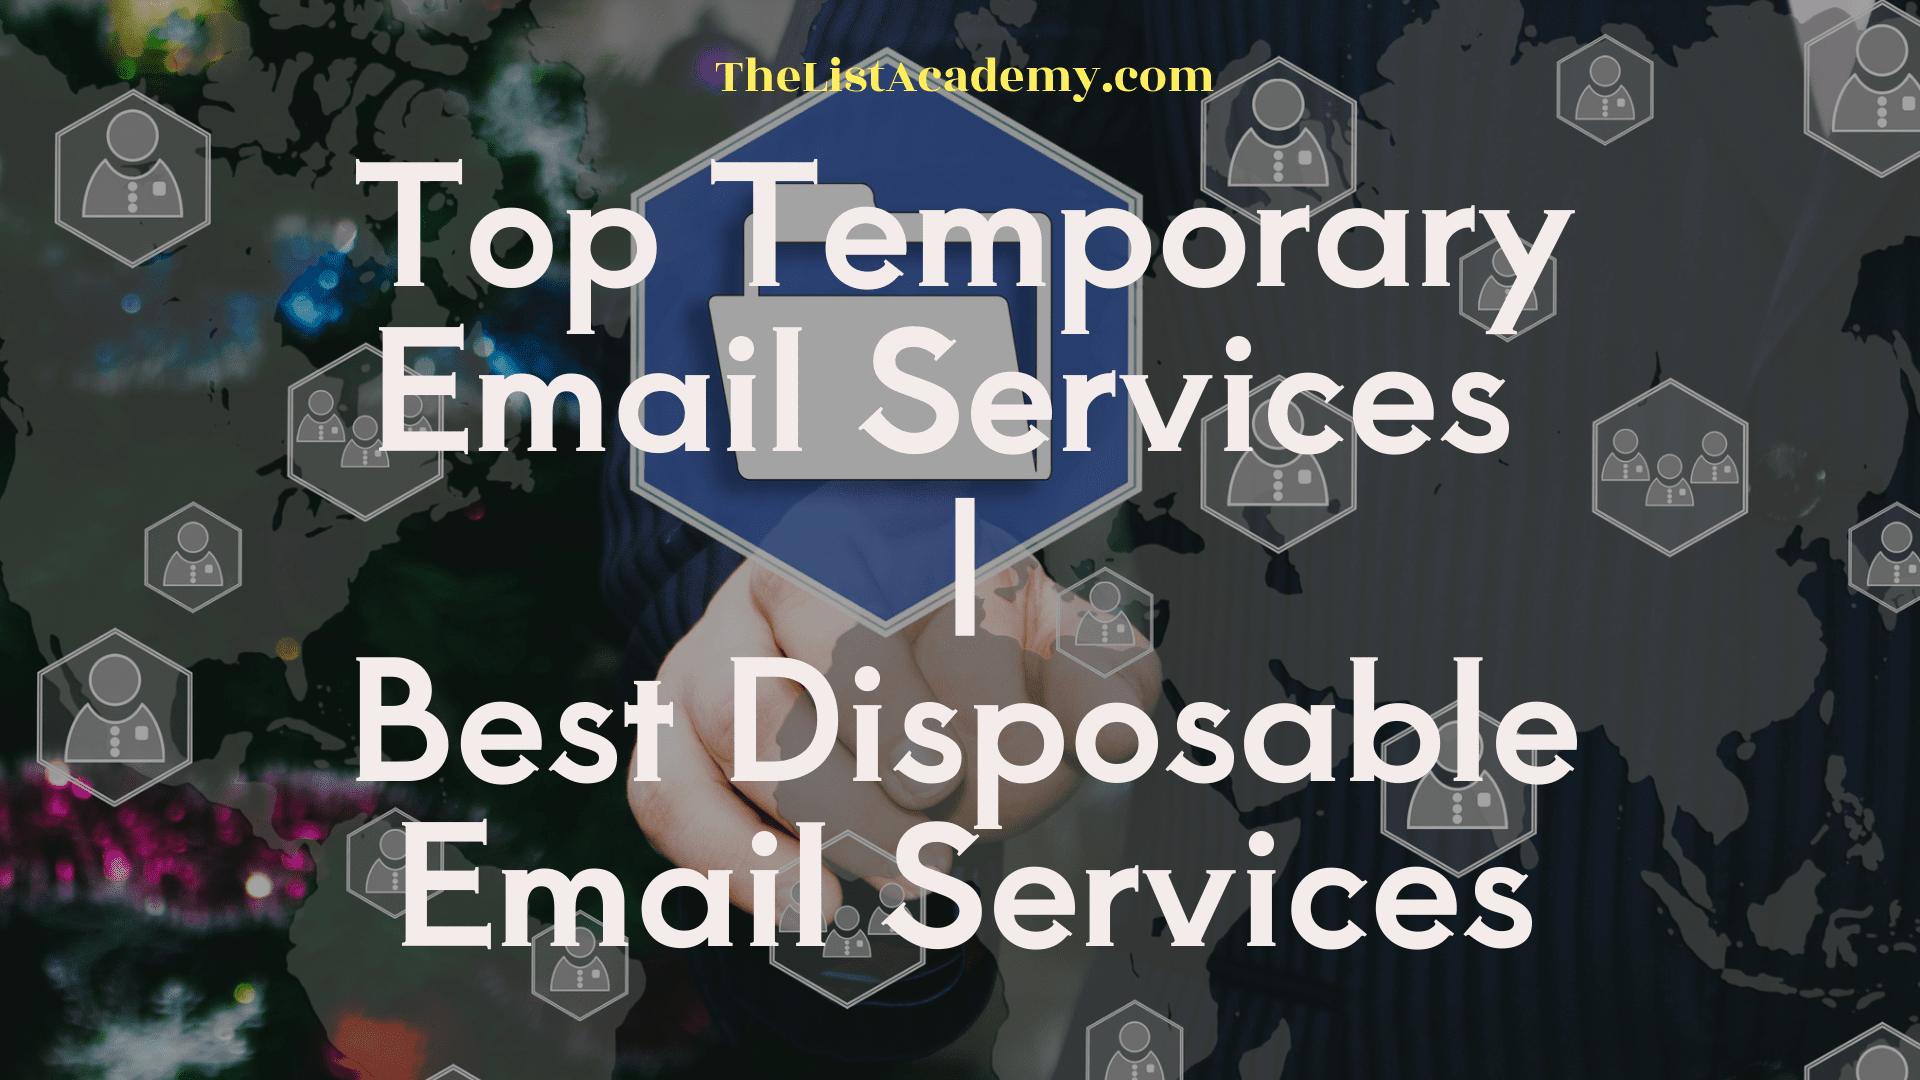 Cover Image For List : Top 44 Temporary Email Services | Best Disposable Email Services 